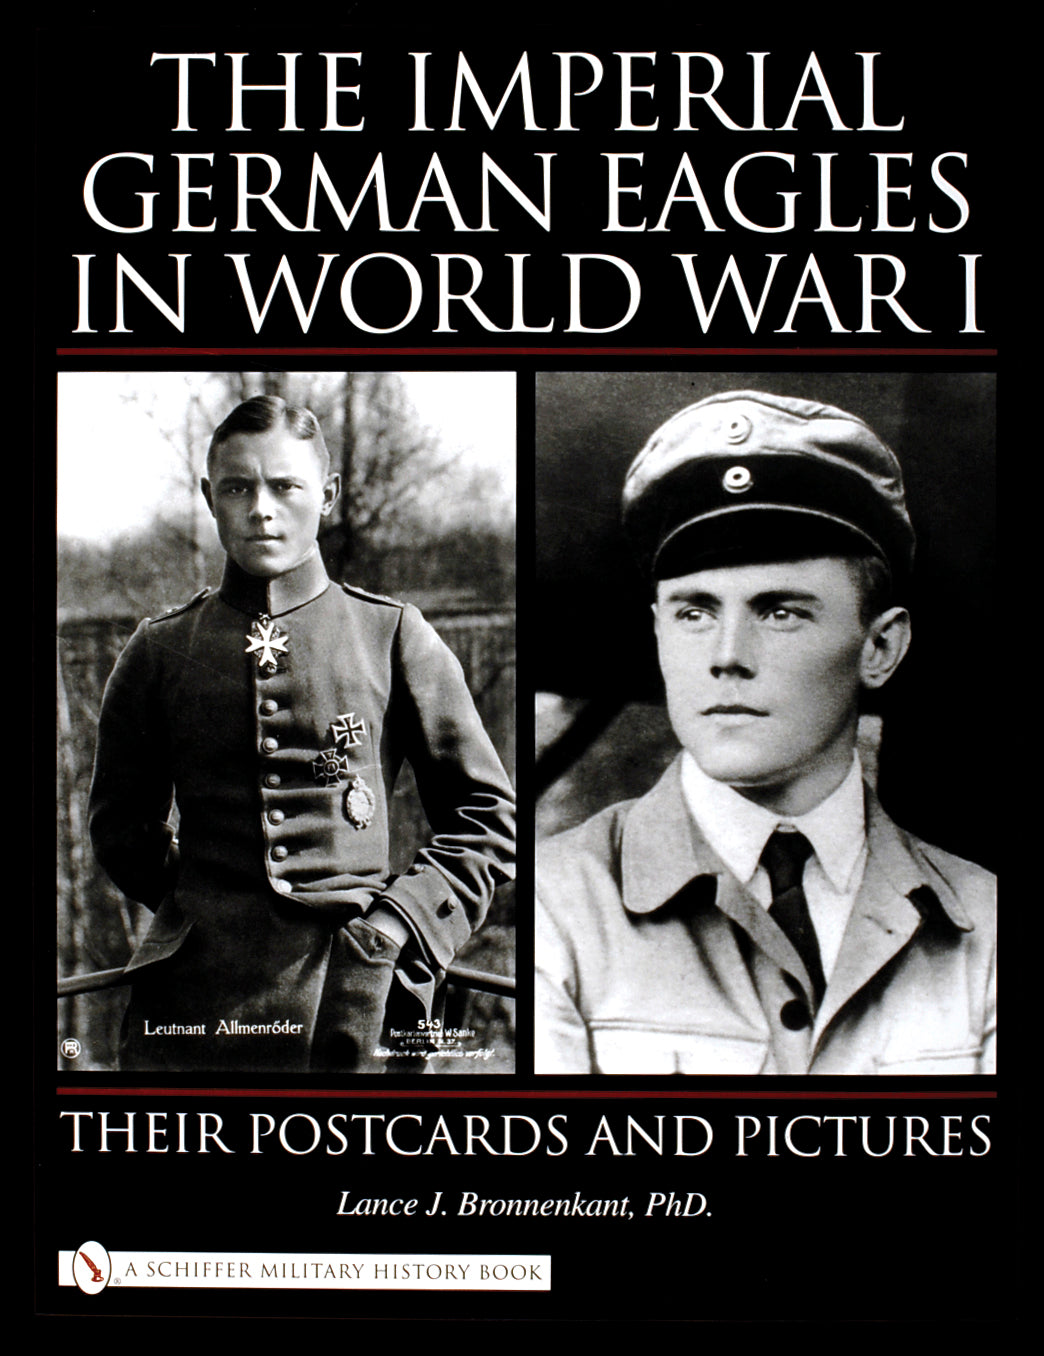 The Imperial German Eagles in World War I, Vol. 1